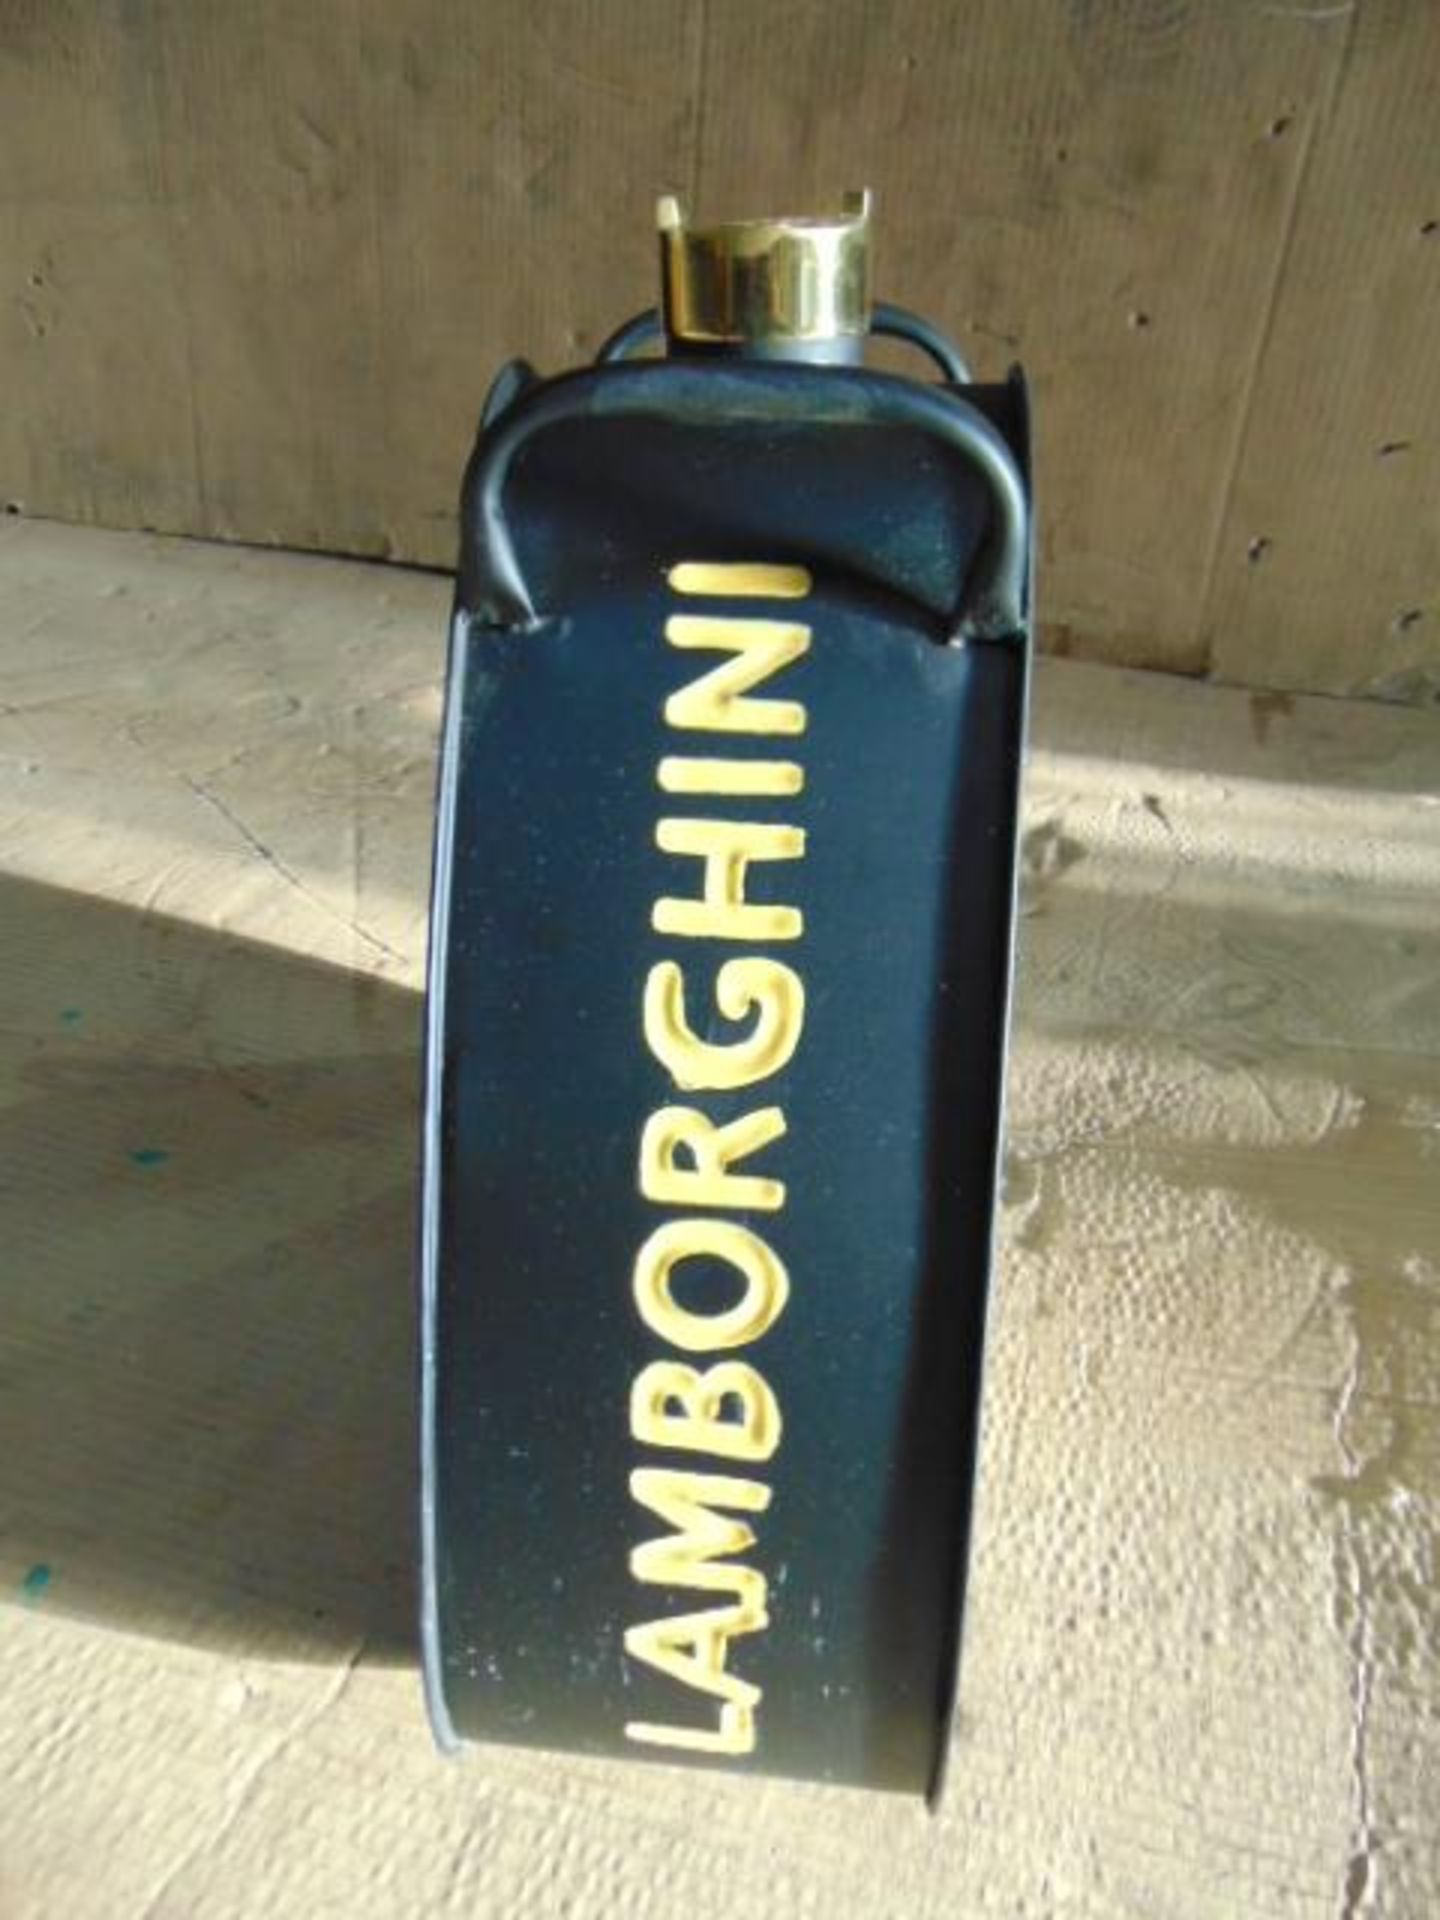 Reproduction Lamborghini Branded Oil Can - Image 3 of 4